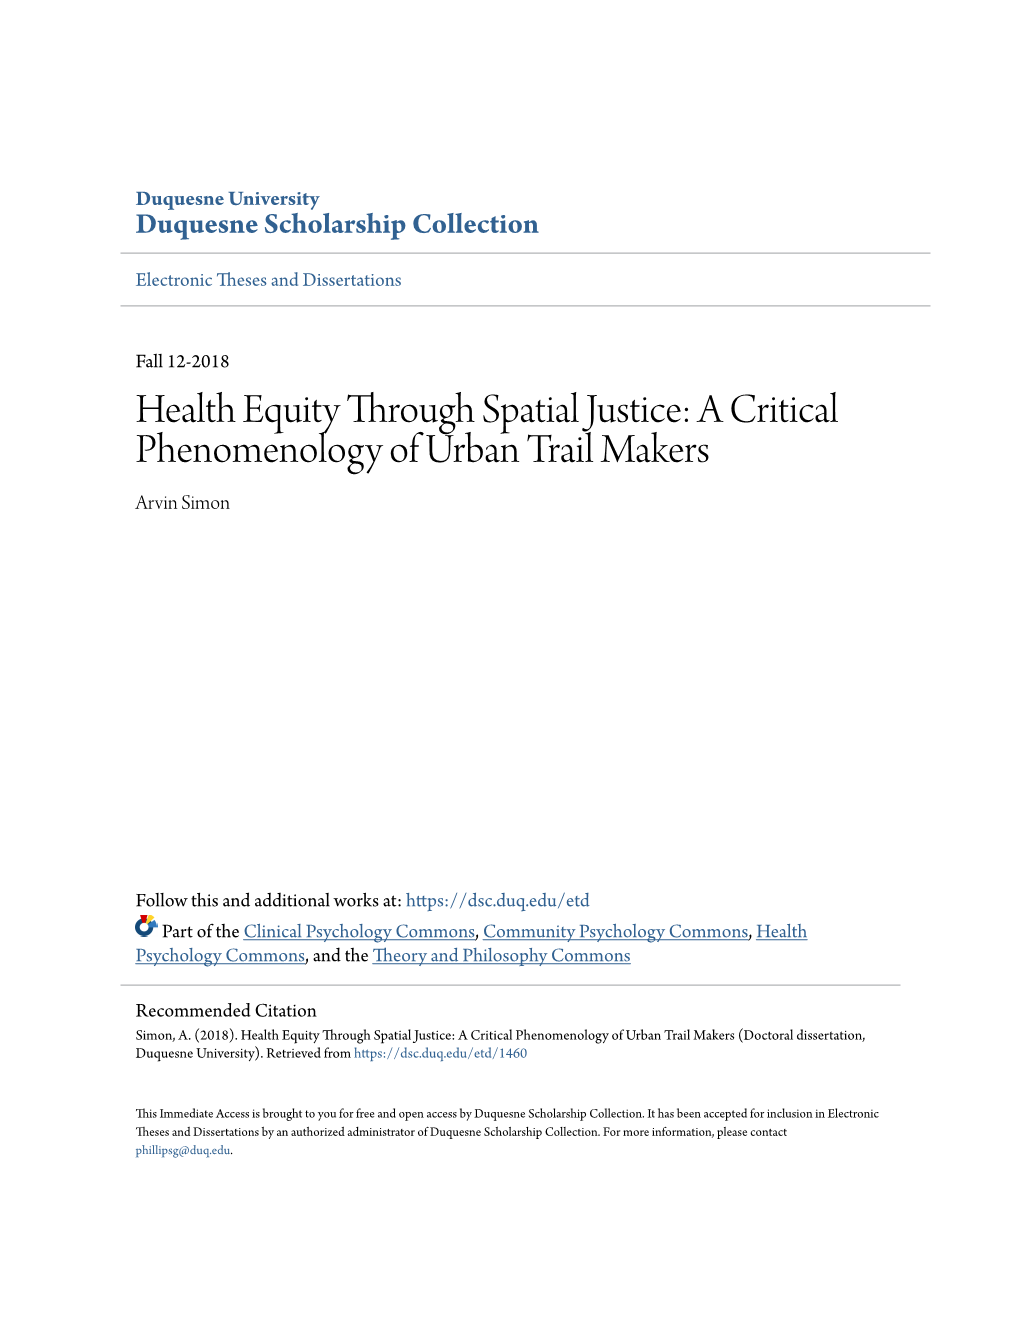 Health Equity Through Spatial Justice: a Critical Phenomenology of Urban Trail Makers Arvin Simon